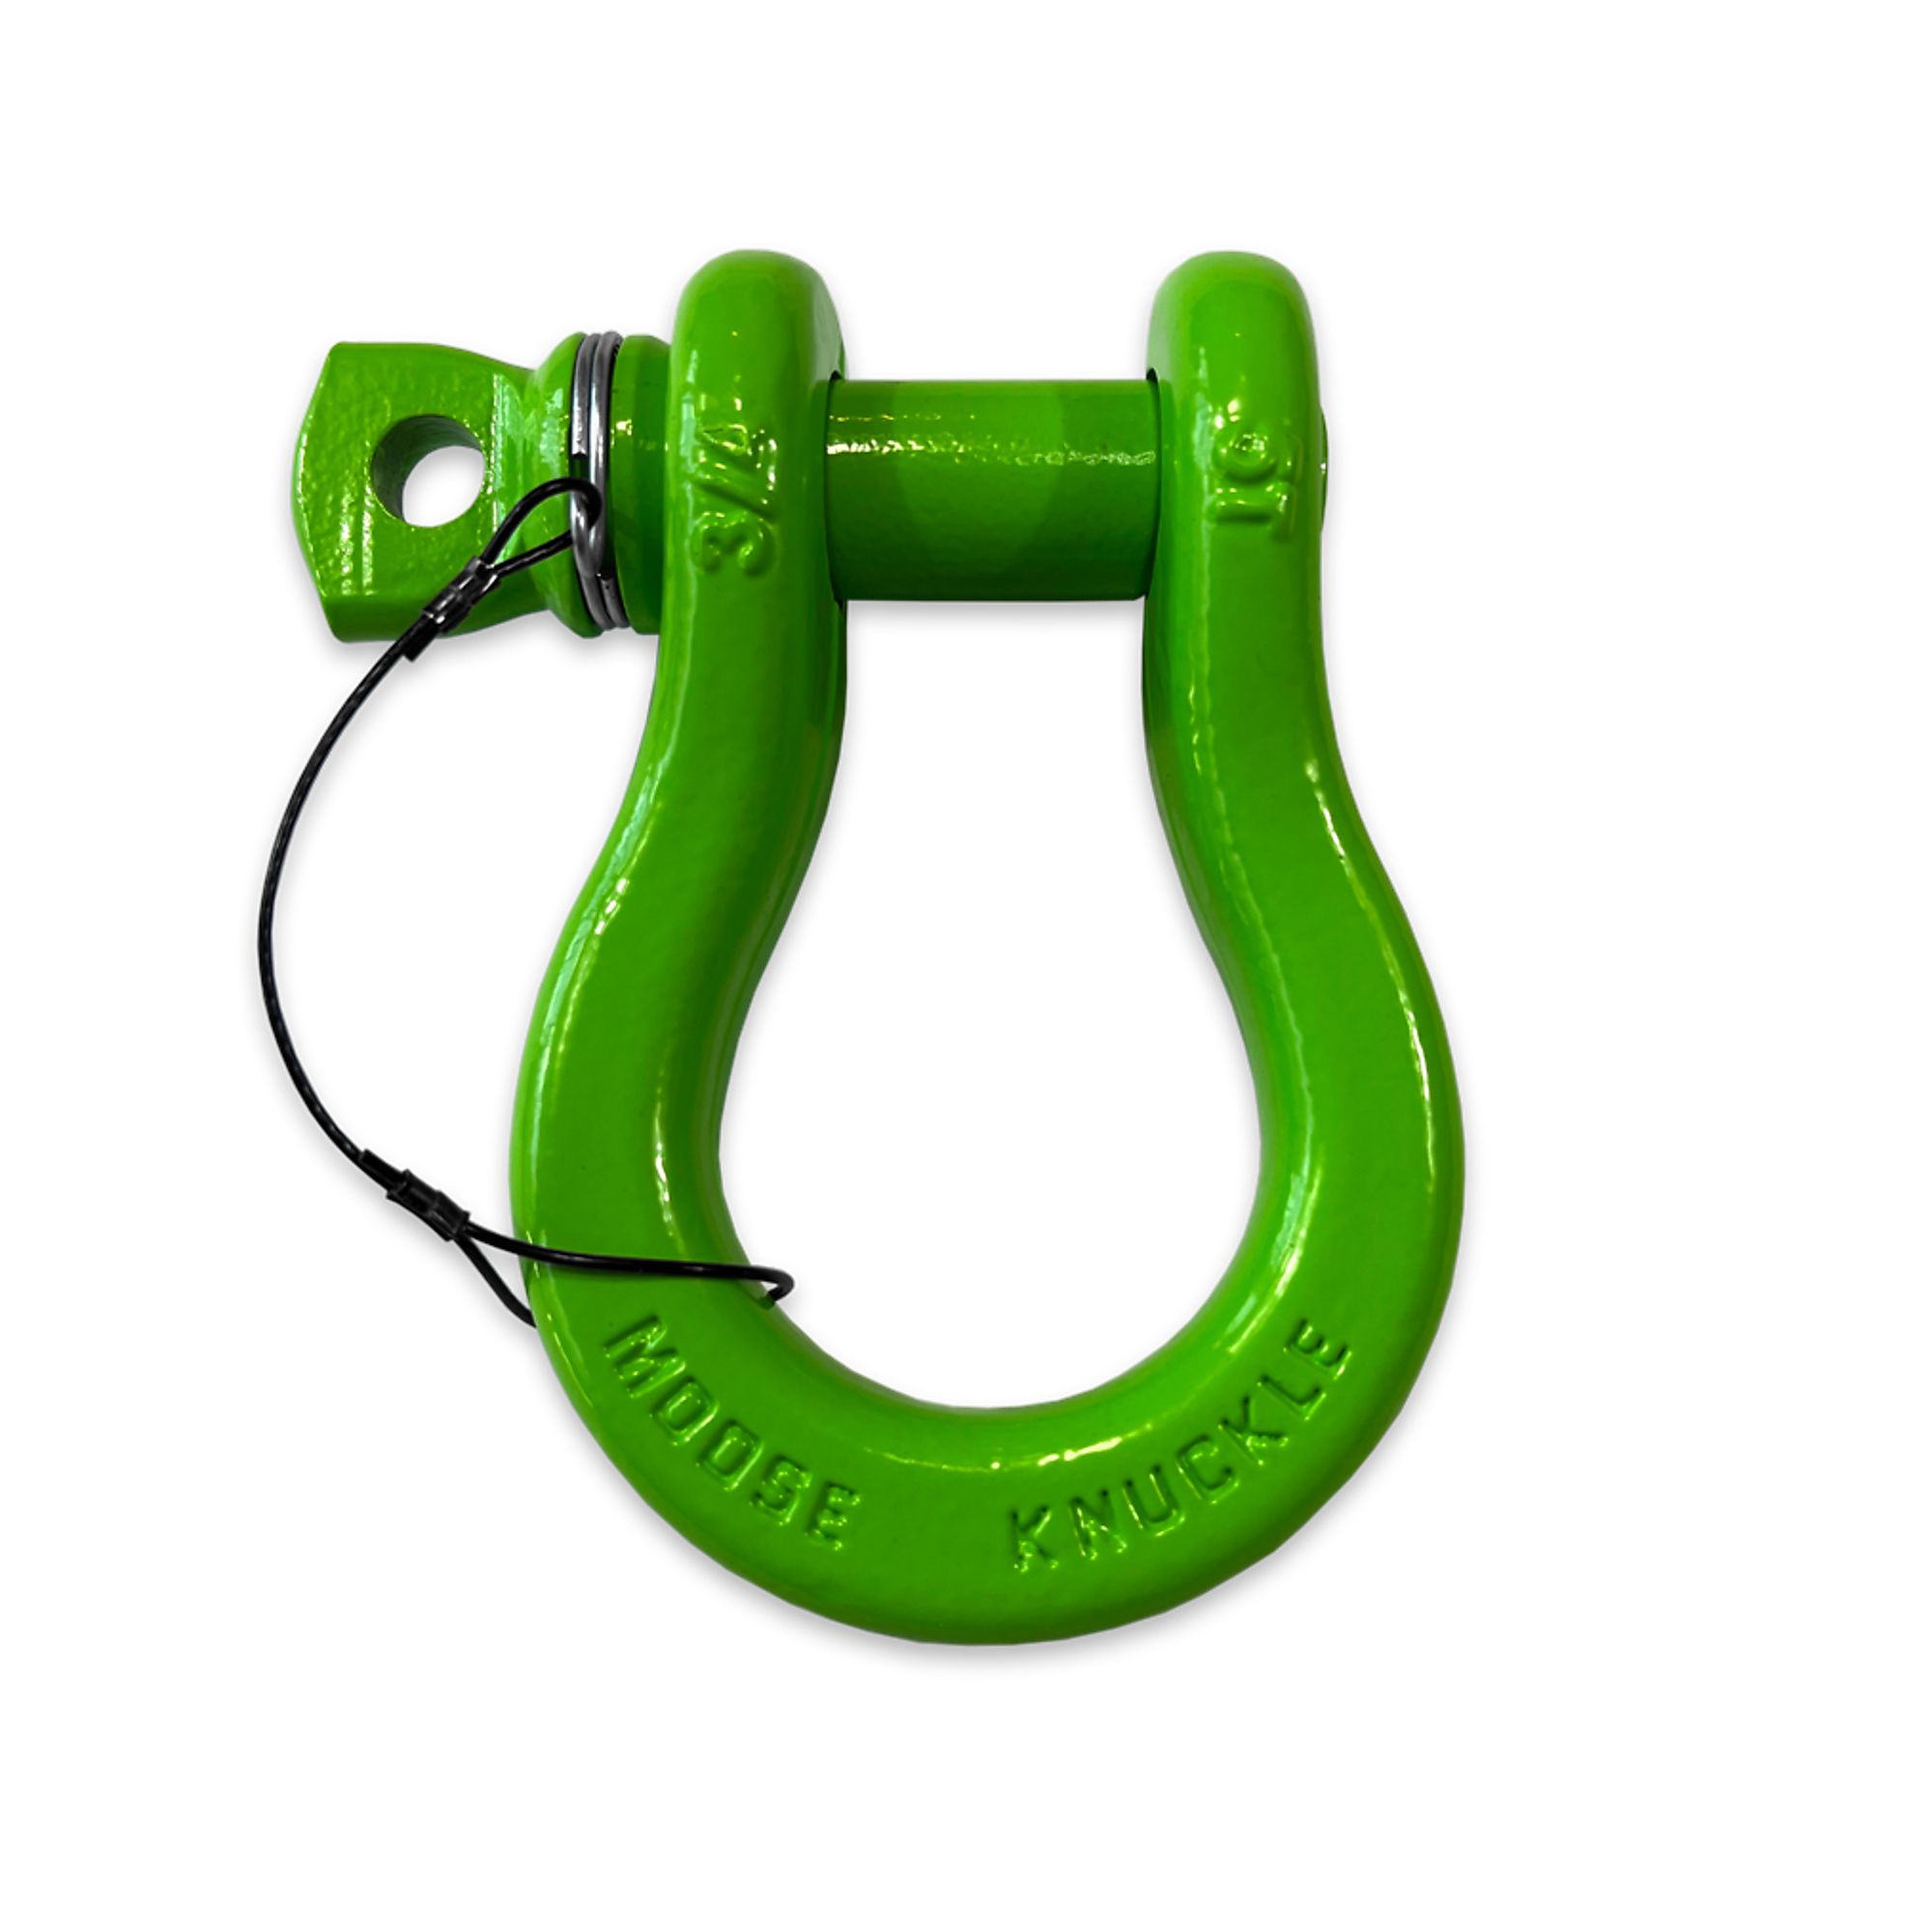 Moose Knuckle Offroad, Sublime Green Recovery Tow Lanyard Spin Pin 3/4 Shackle, Working Load Limit 10000 lb, Model FN000023-006